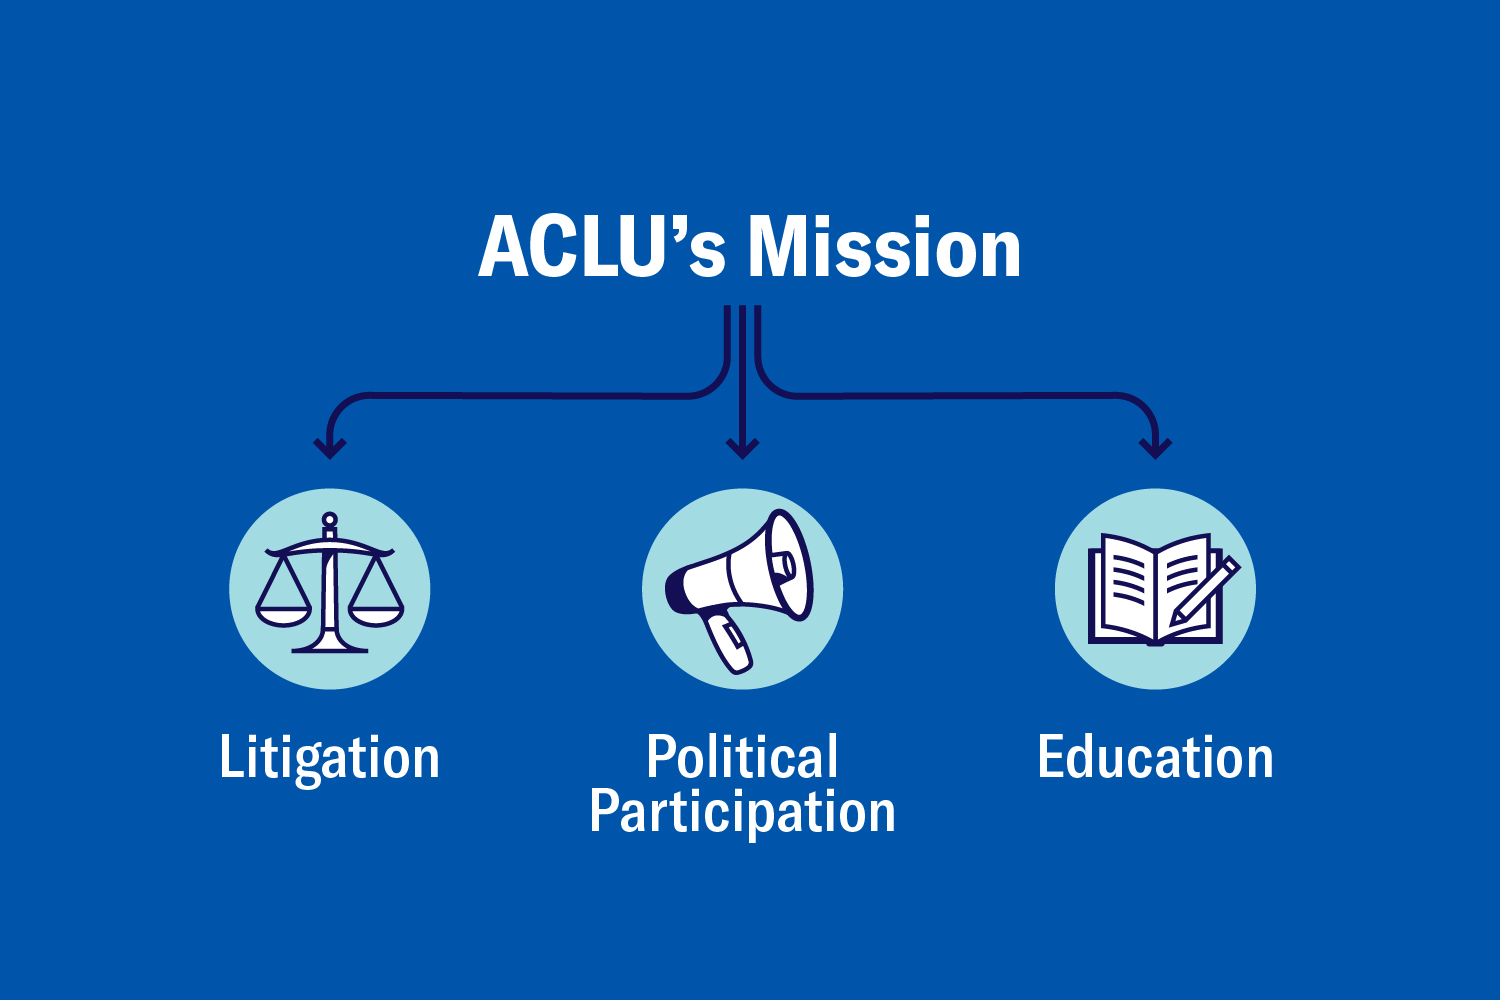 ACLU mission represented by icons of scale, megaphone, and book